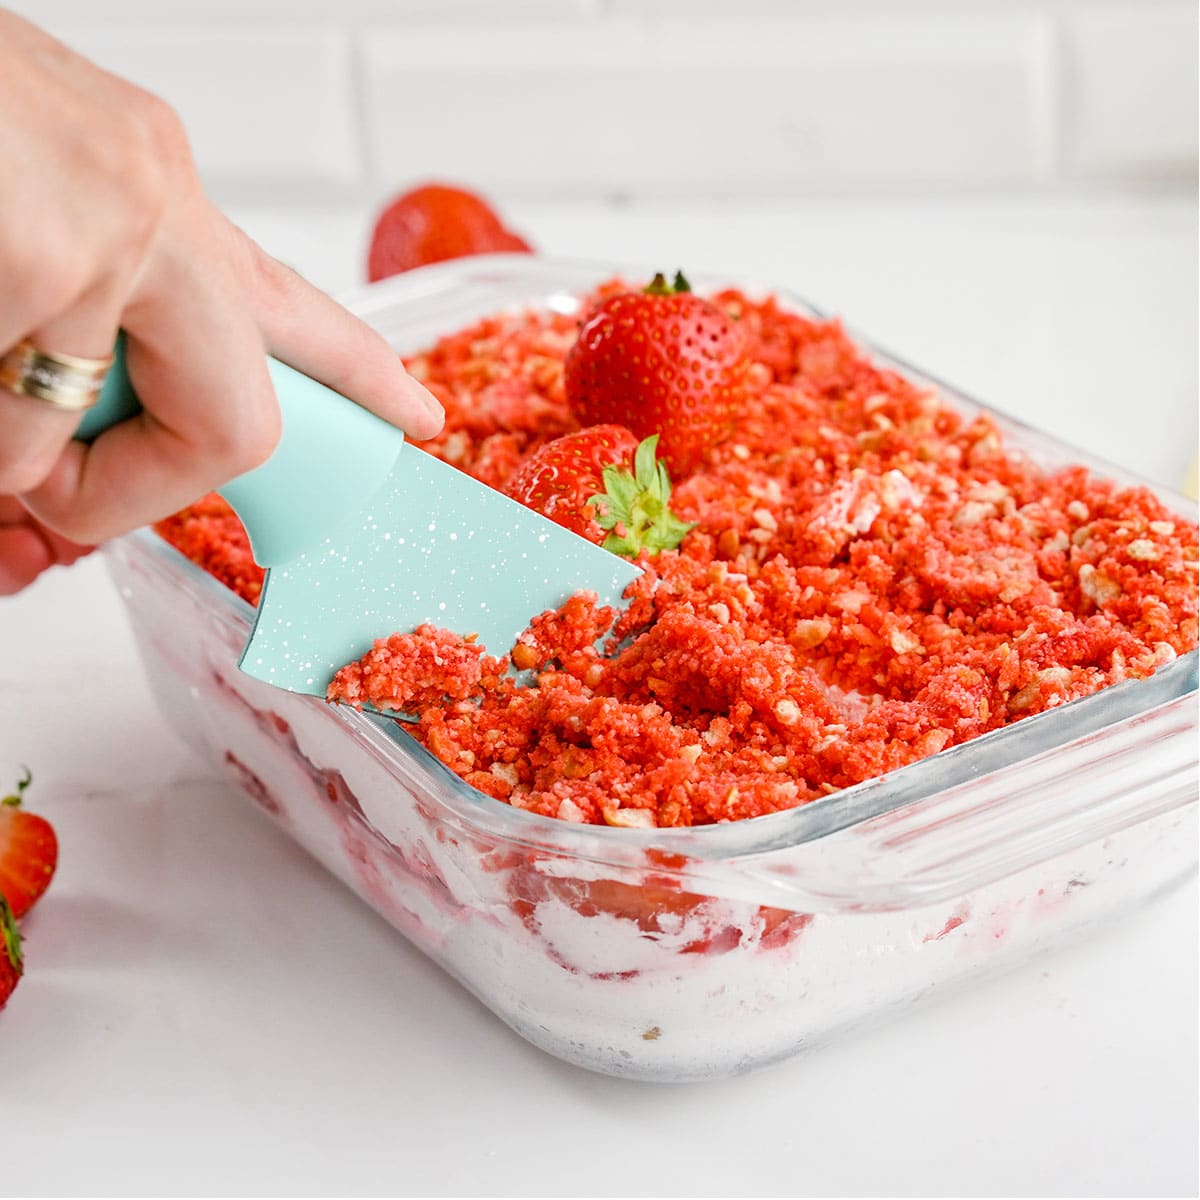 Slicing of the Strawberry Crumble Icebox cake.